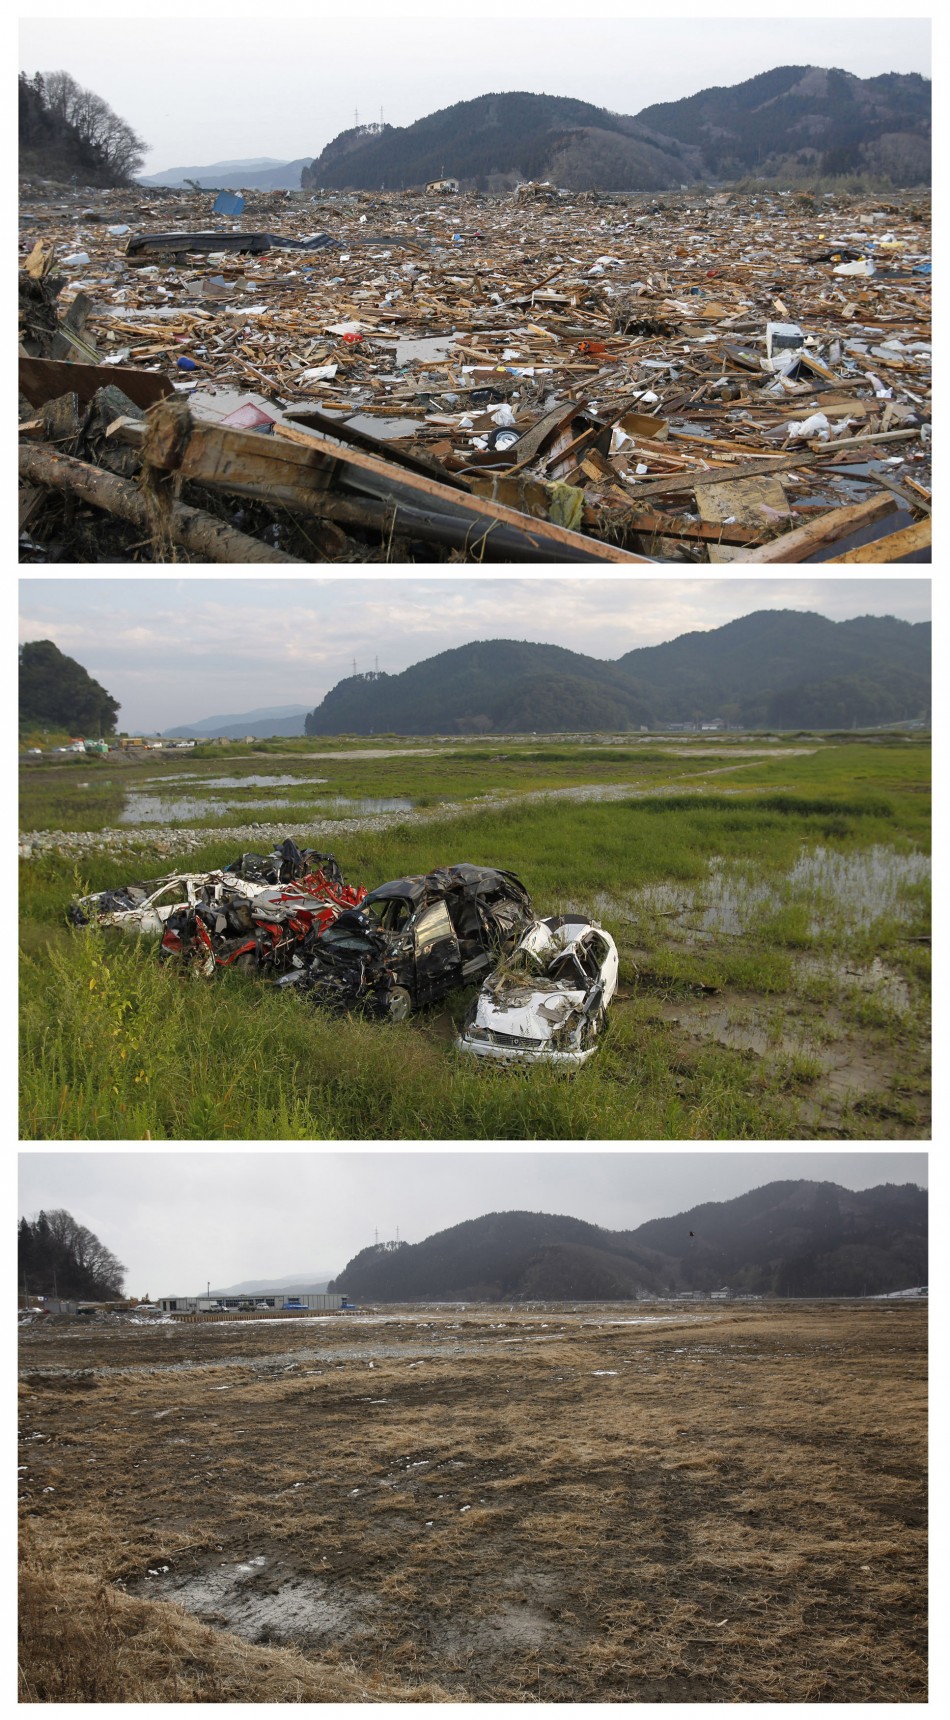 Japan Tsunami - Then and Now